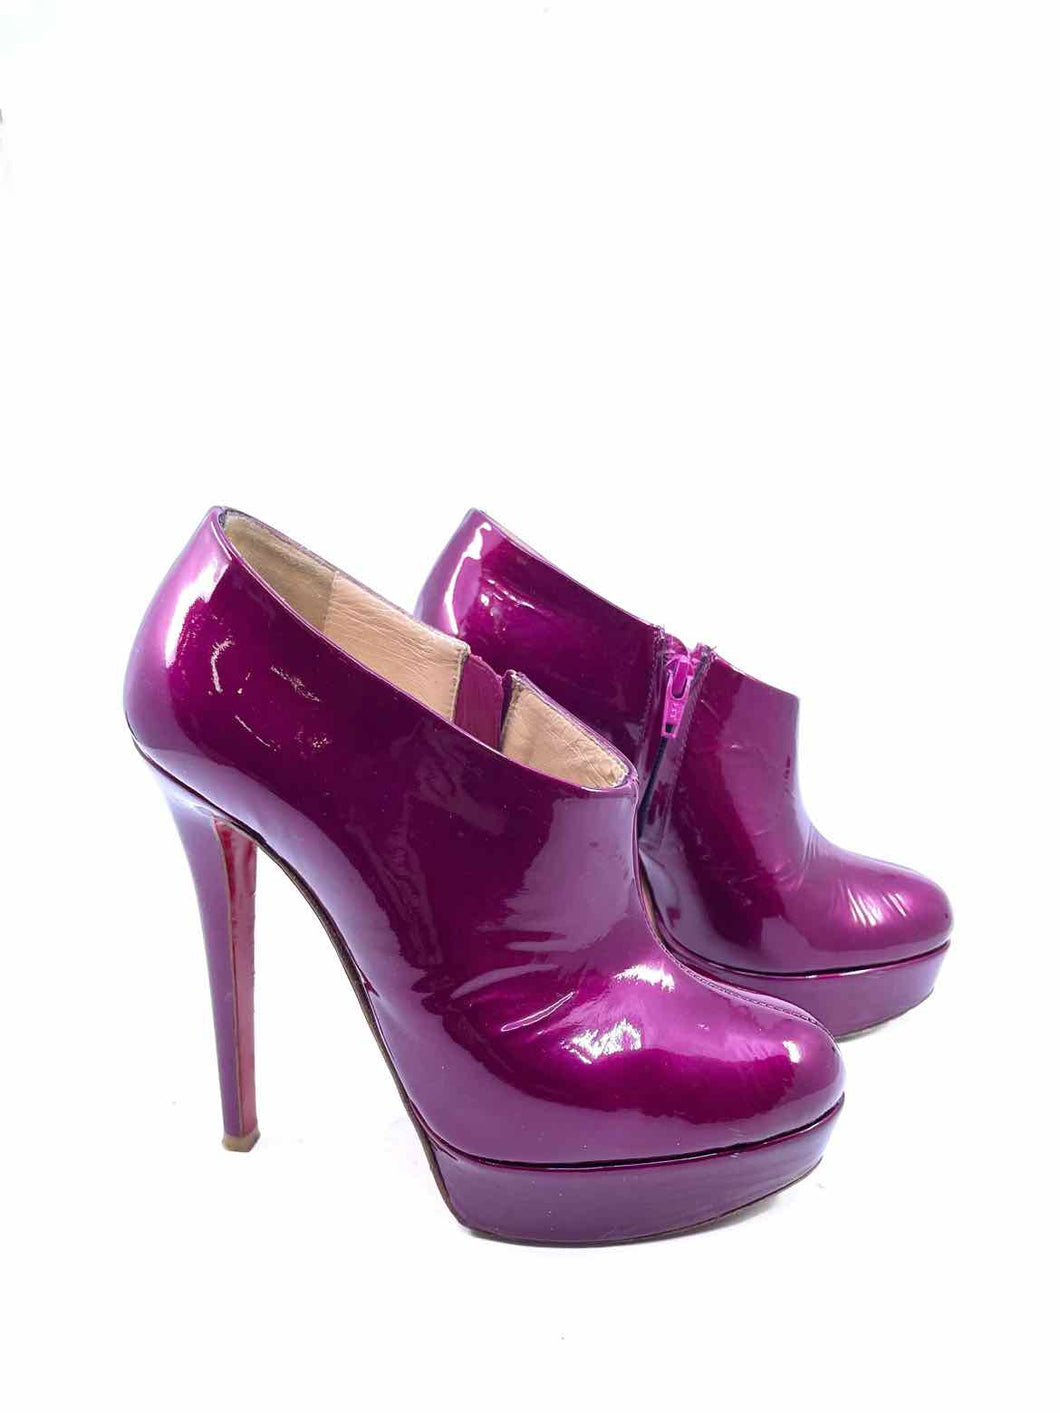 Louis Vuitton Authenticated Patent Leather Ankle Boots